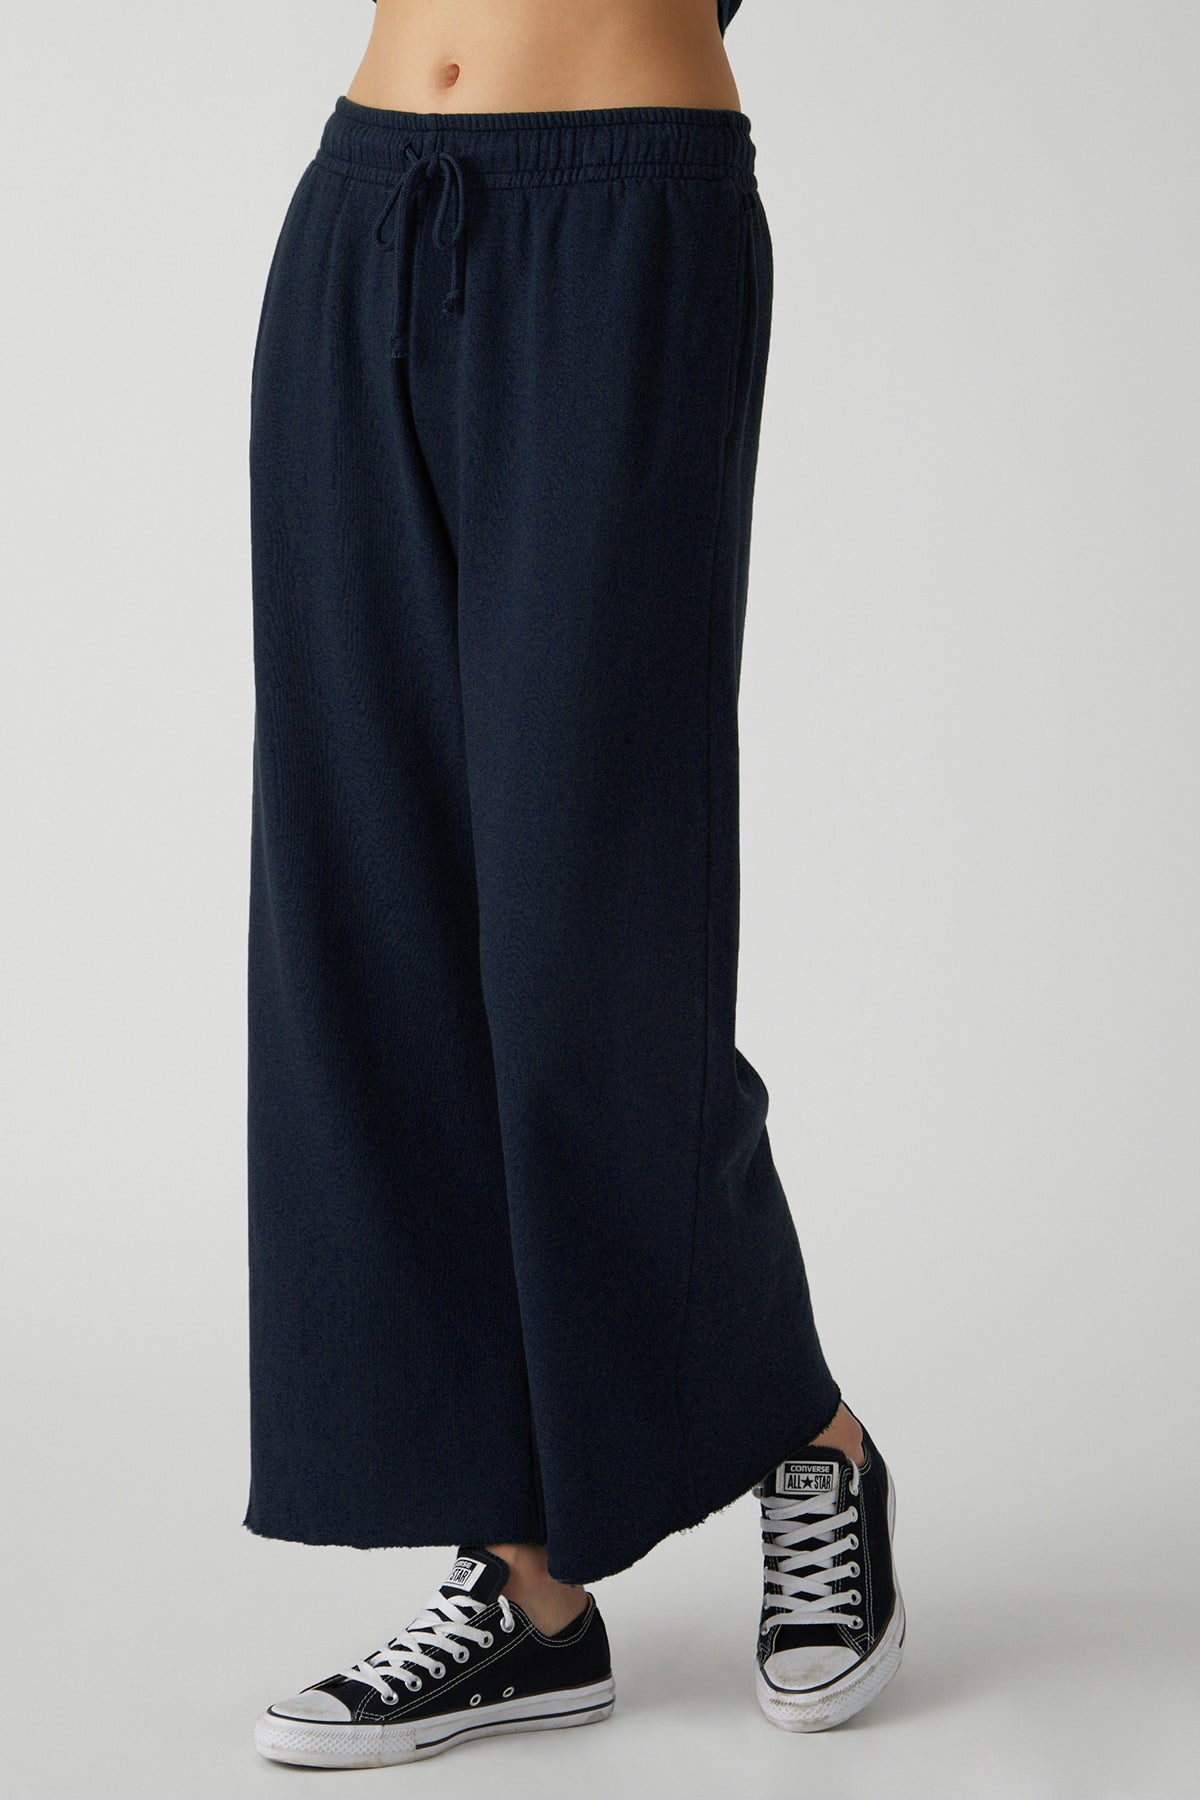 Montecito Sweatpant in Navy front at angle-26458442825921